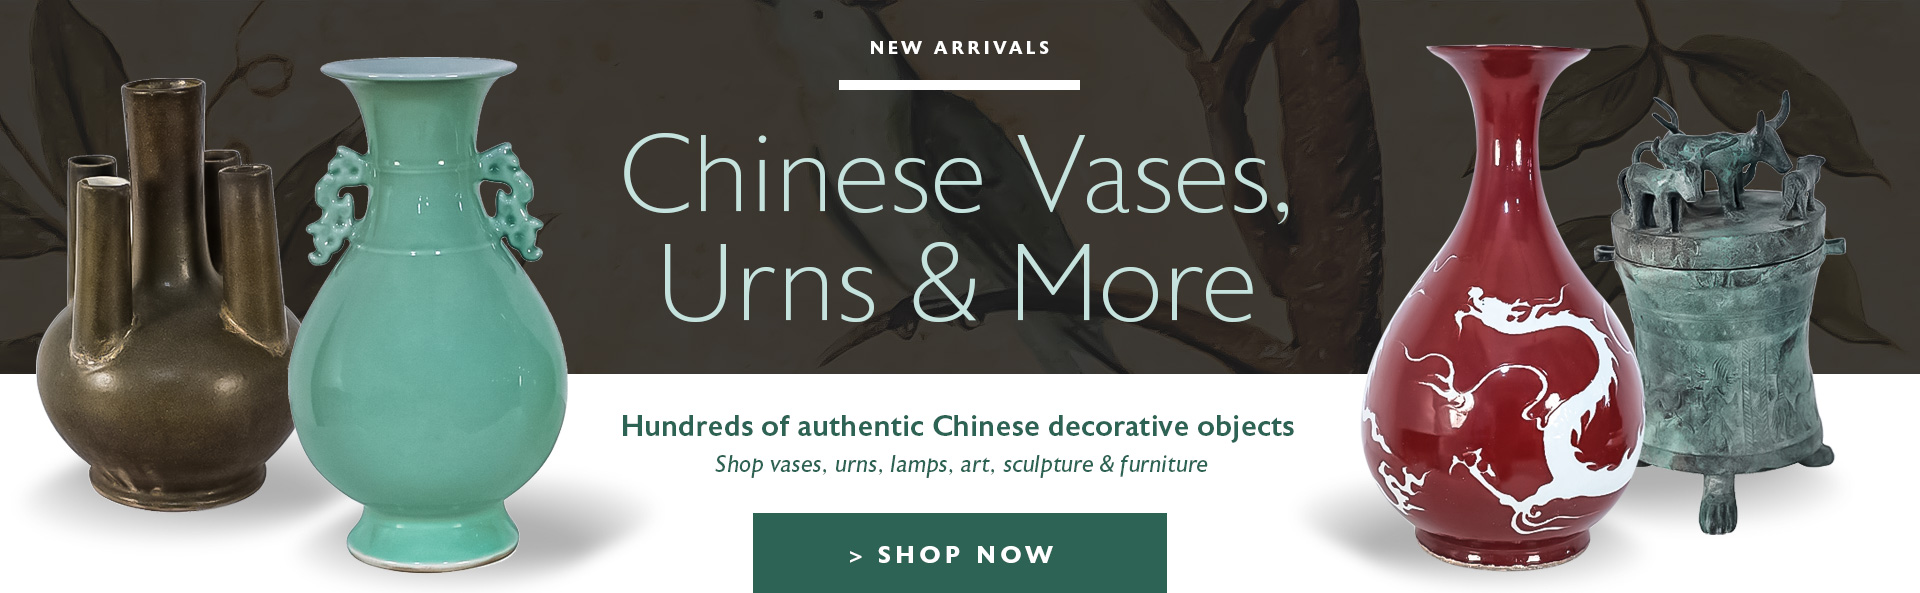 Chinese Vases, Urns & More